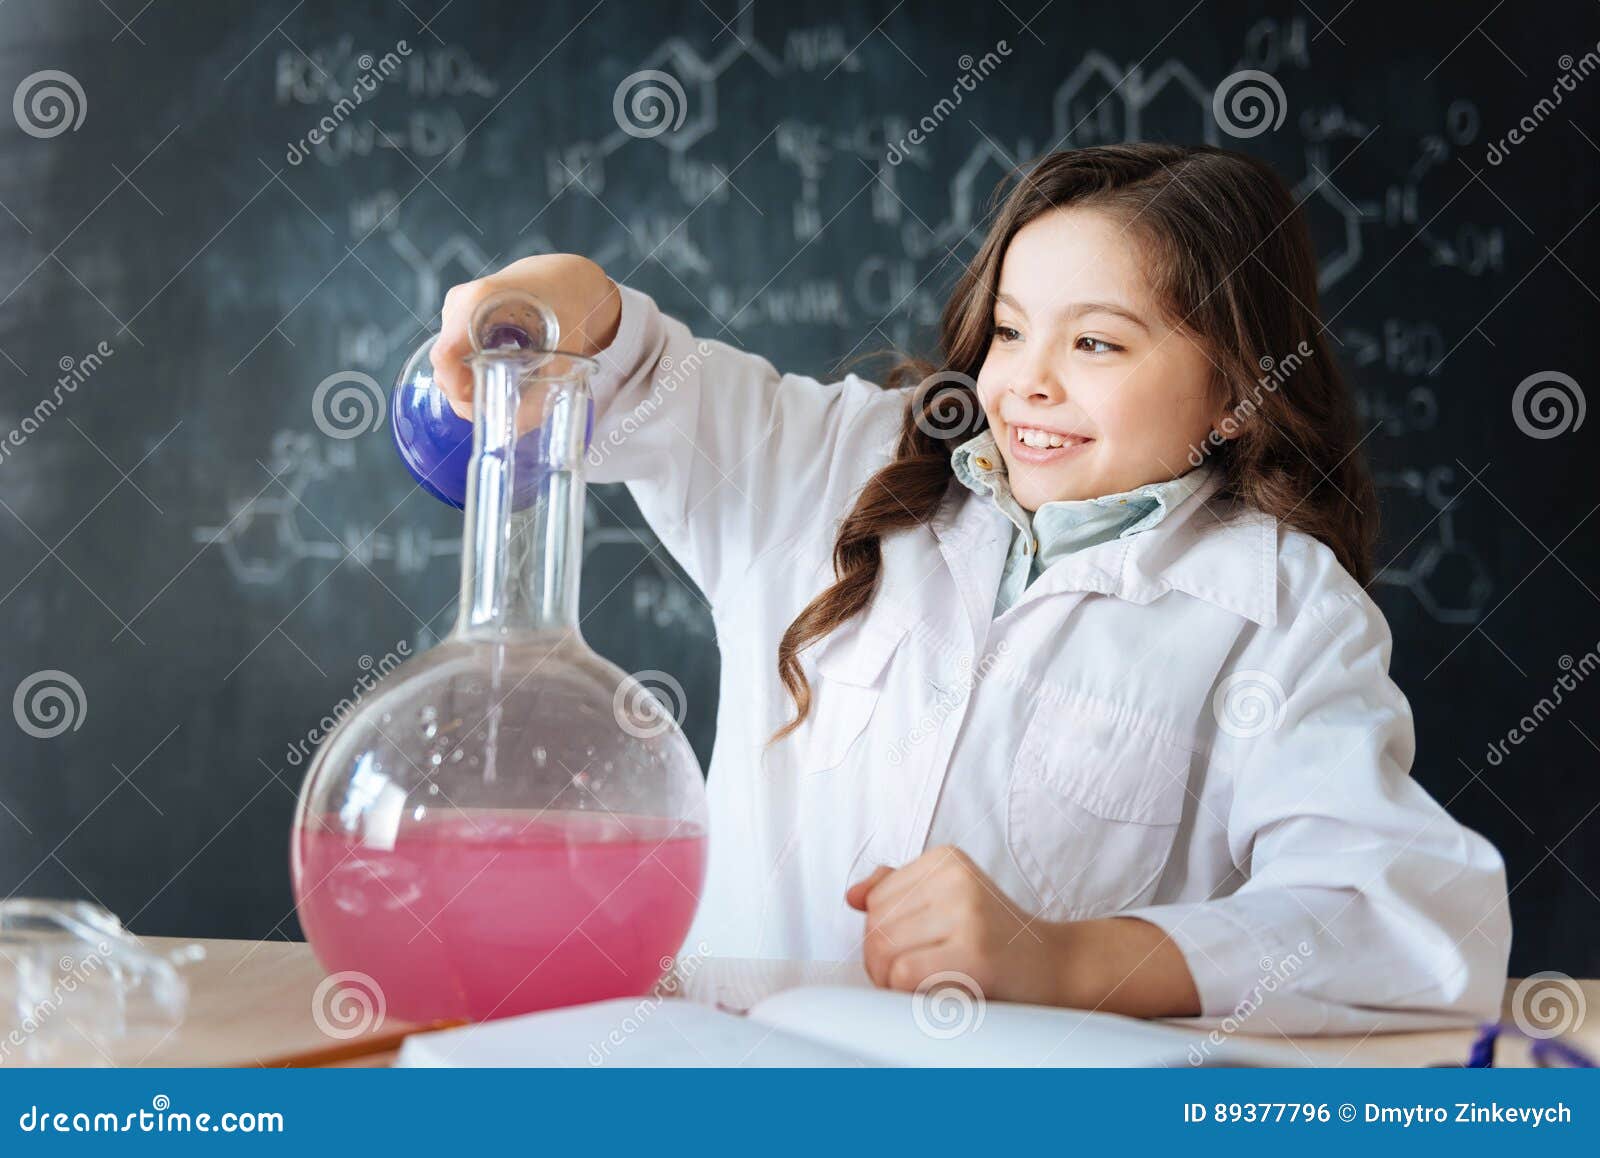 talented little girl taking part in science experiment in the laboratory